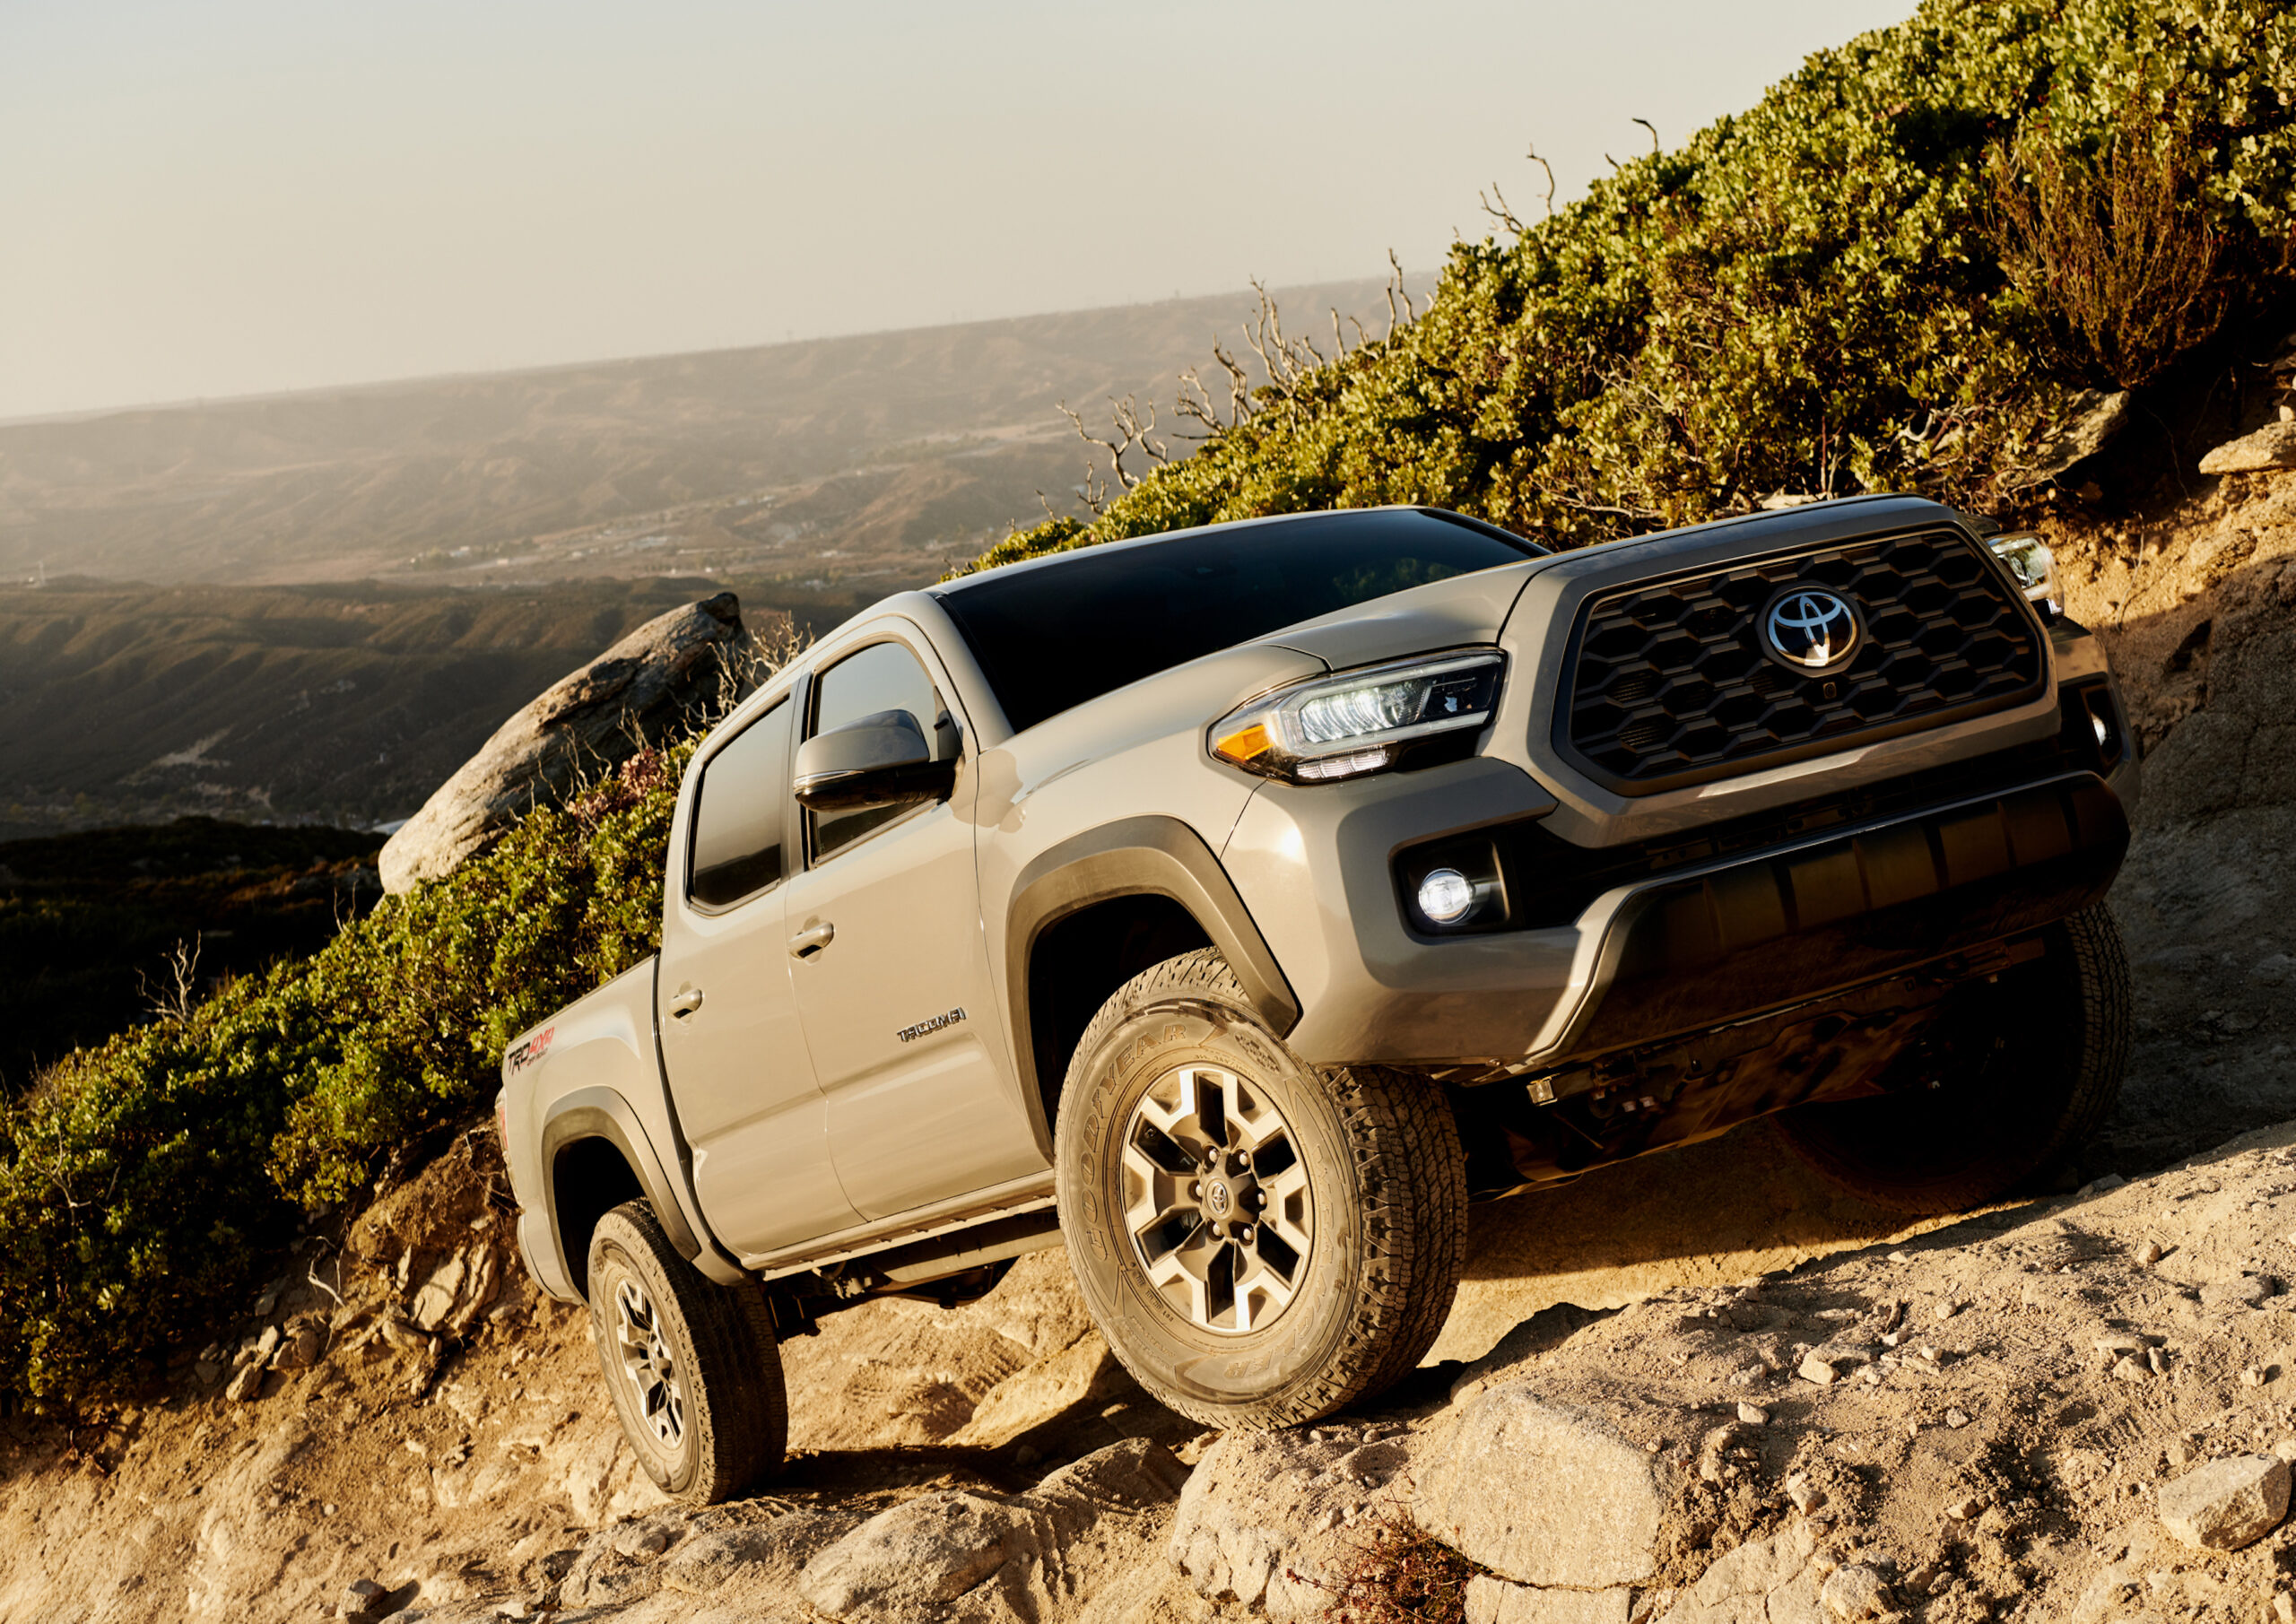 The Tacoma has a low tow and payload capacity rating.